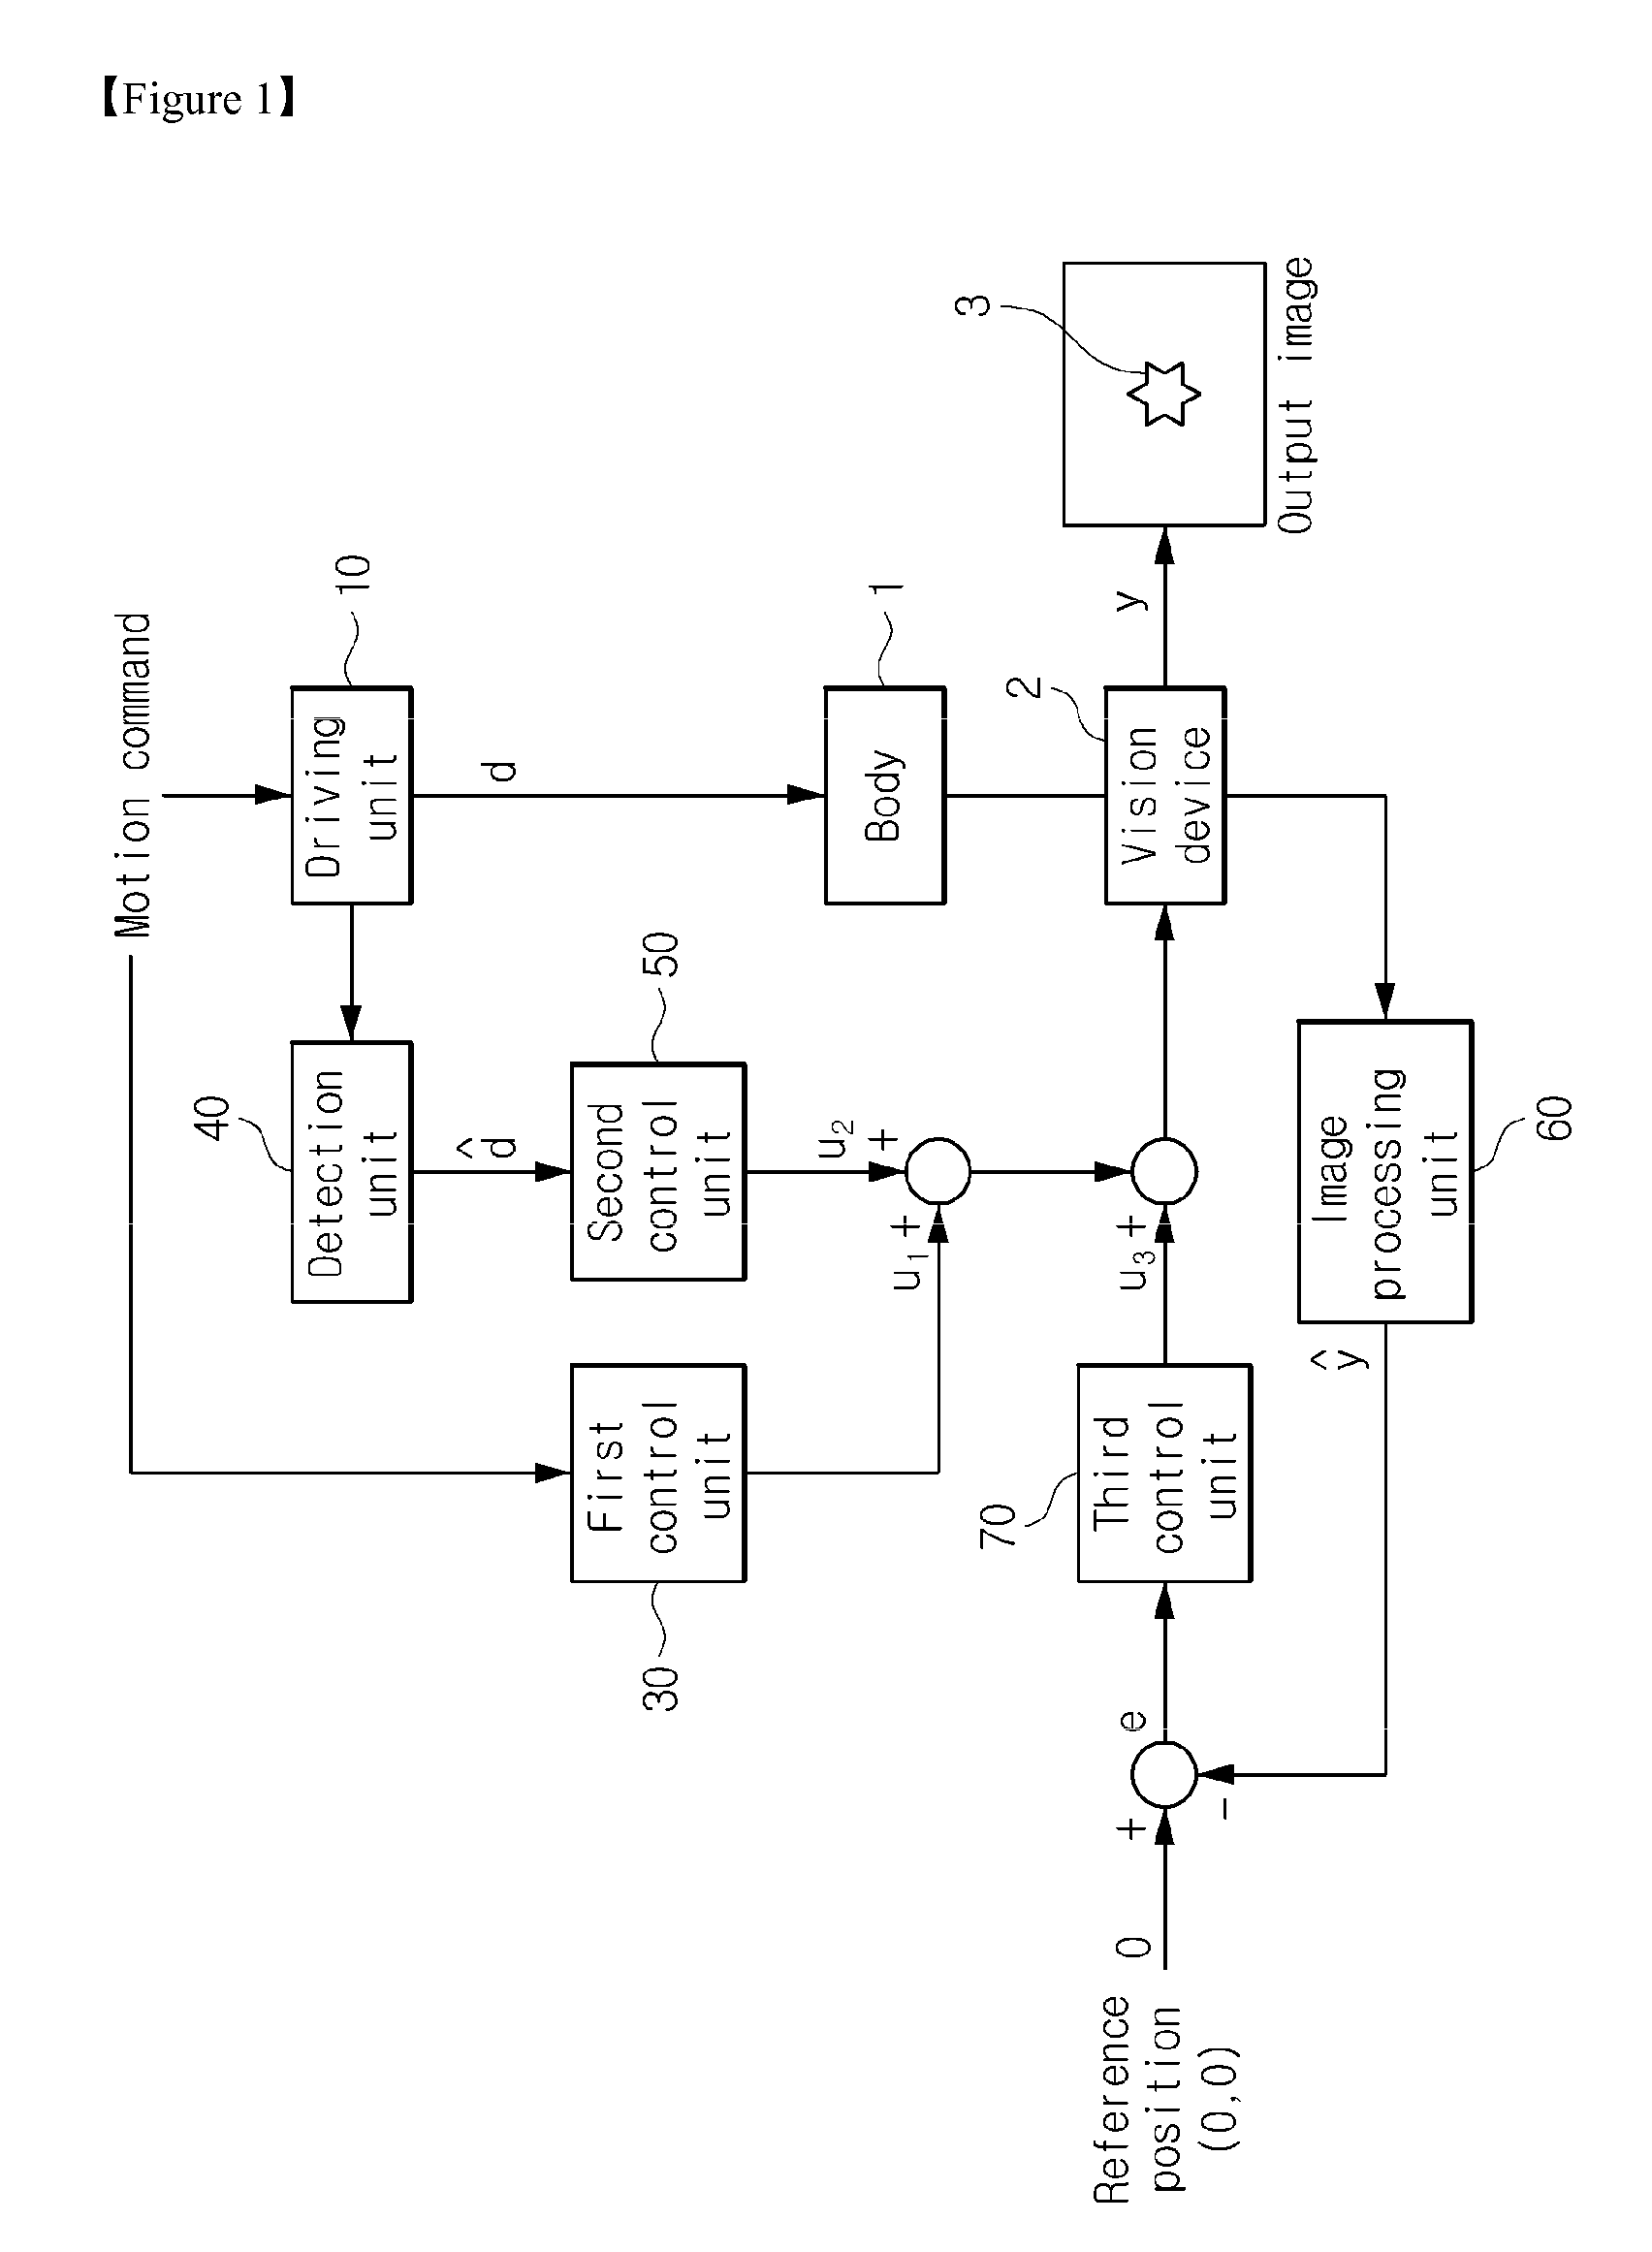 System and method of controlling vision device for tracking target based on motion commands